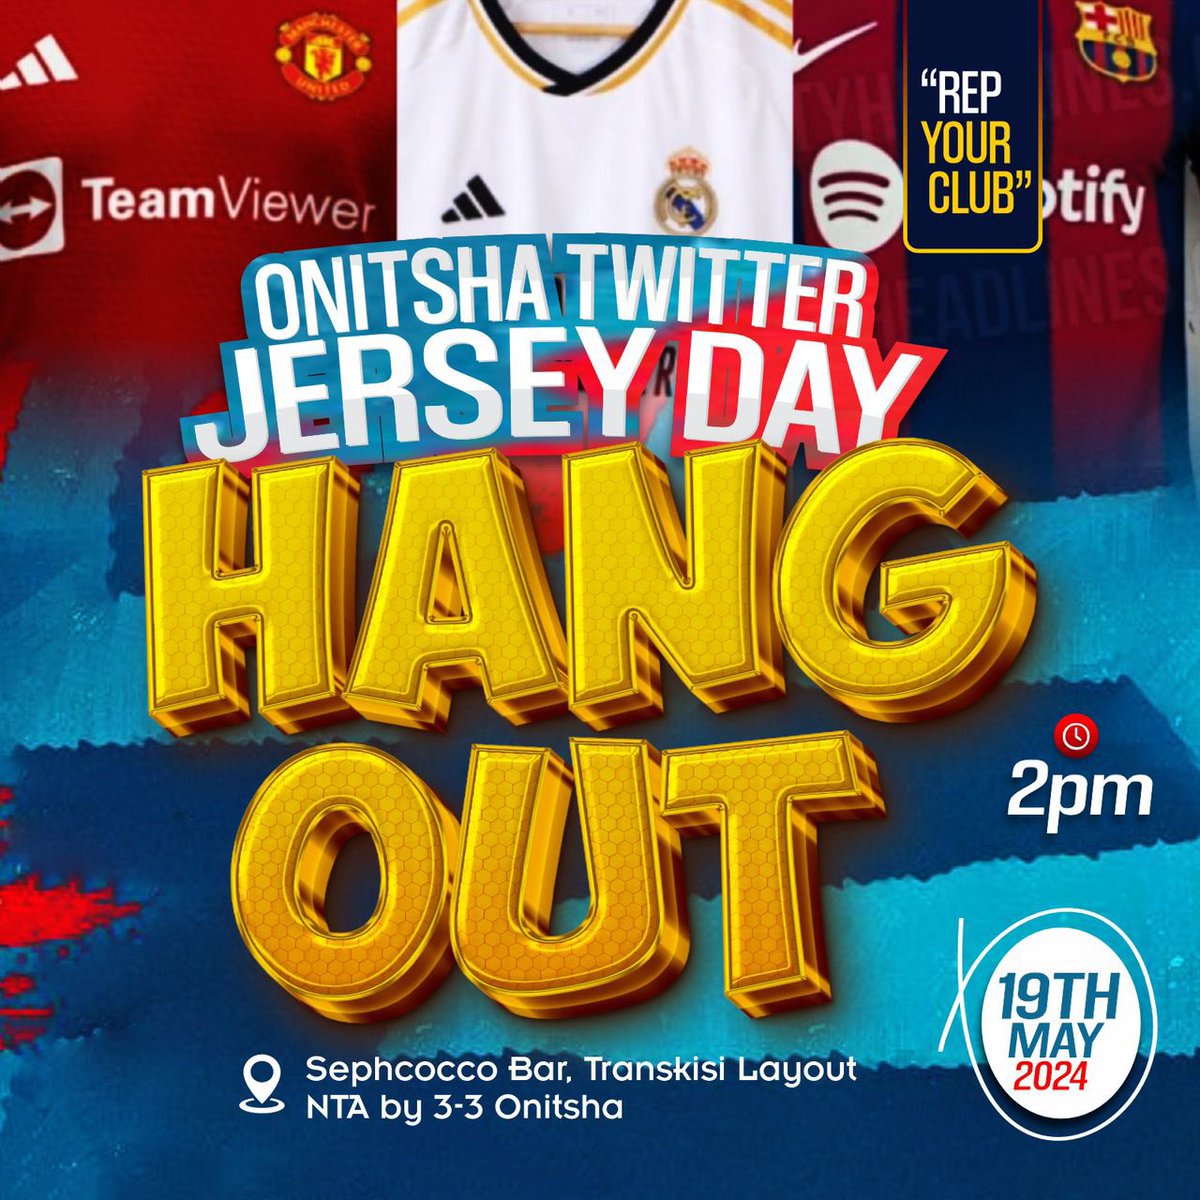 I'll be rocking Manchester United Jersey at #OnitshaTwitterJerseyHangout on Sunday. NB: I'm not a United fan, but I want to bant. Come Rep your Club as well coz it'll be lively and fun when #WazobiaFMOnitsha will be there to air every moment back to back